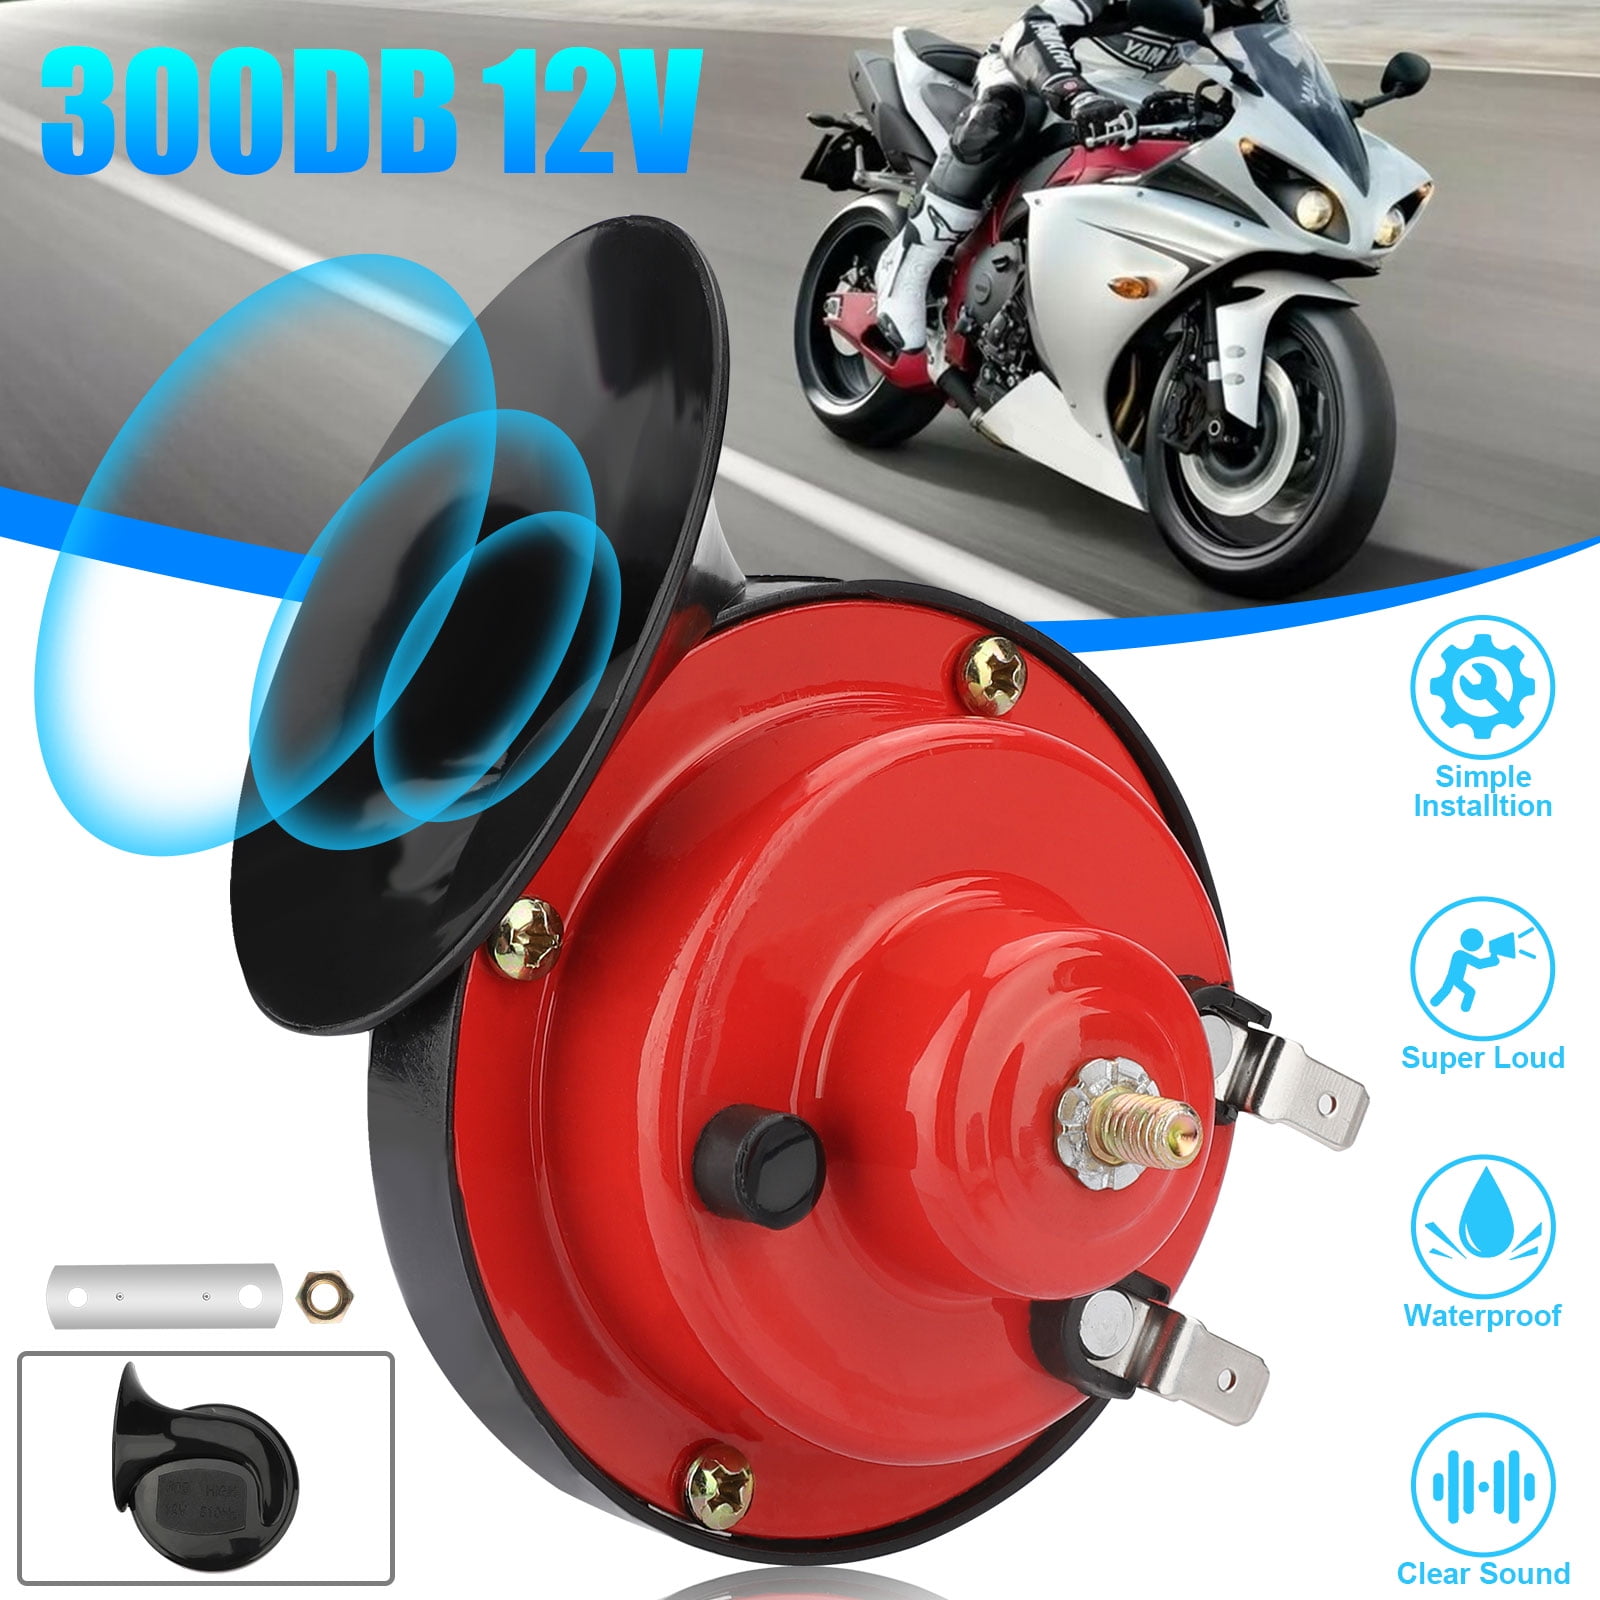 Double Air Horn Raging Sound Raging Sound 12v Waterproof Loud Boat Horns Electric Train Horn for Truck Motorcycle Car 